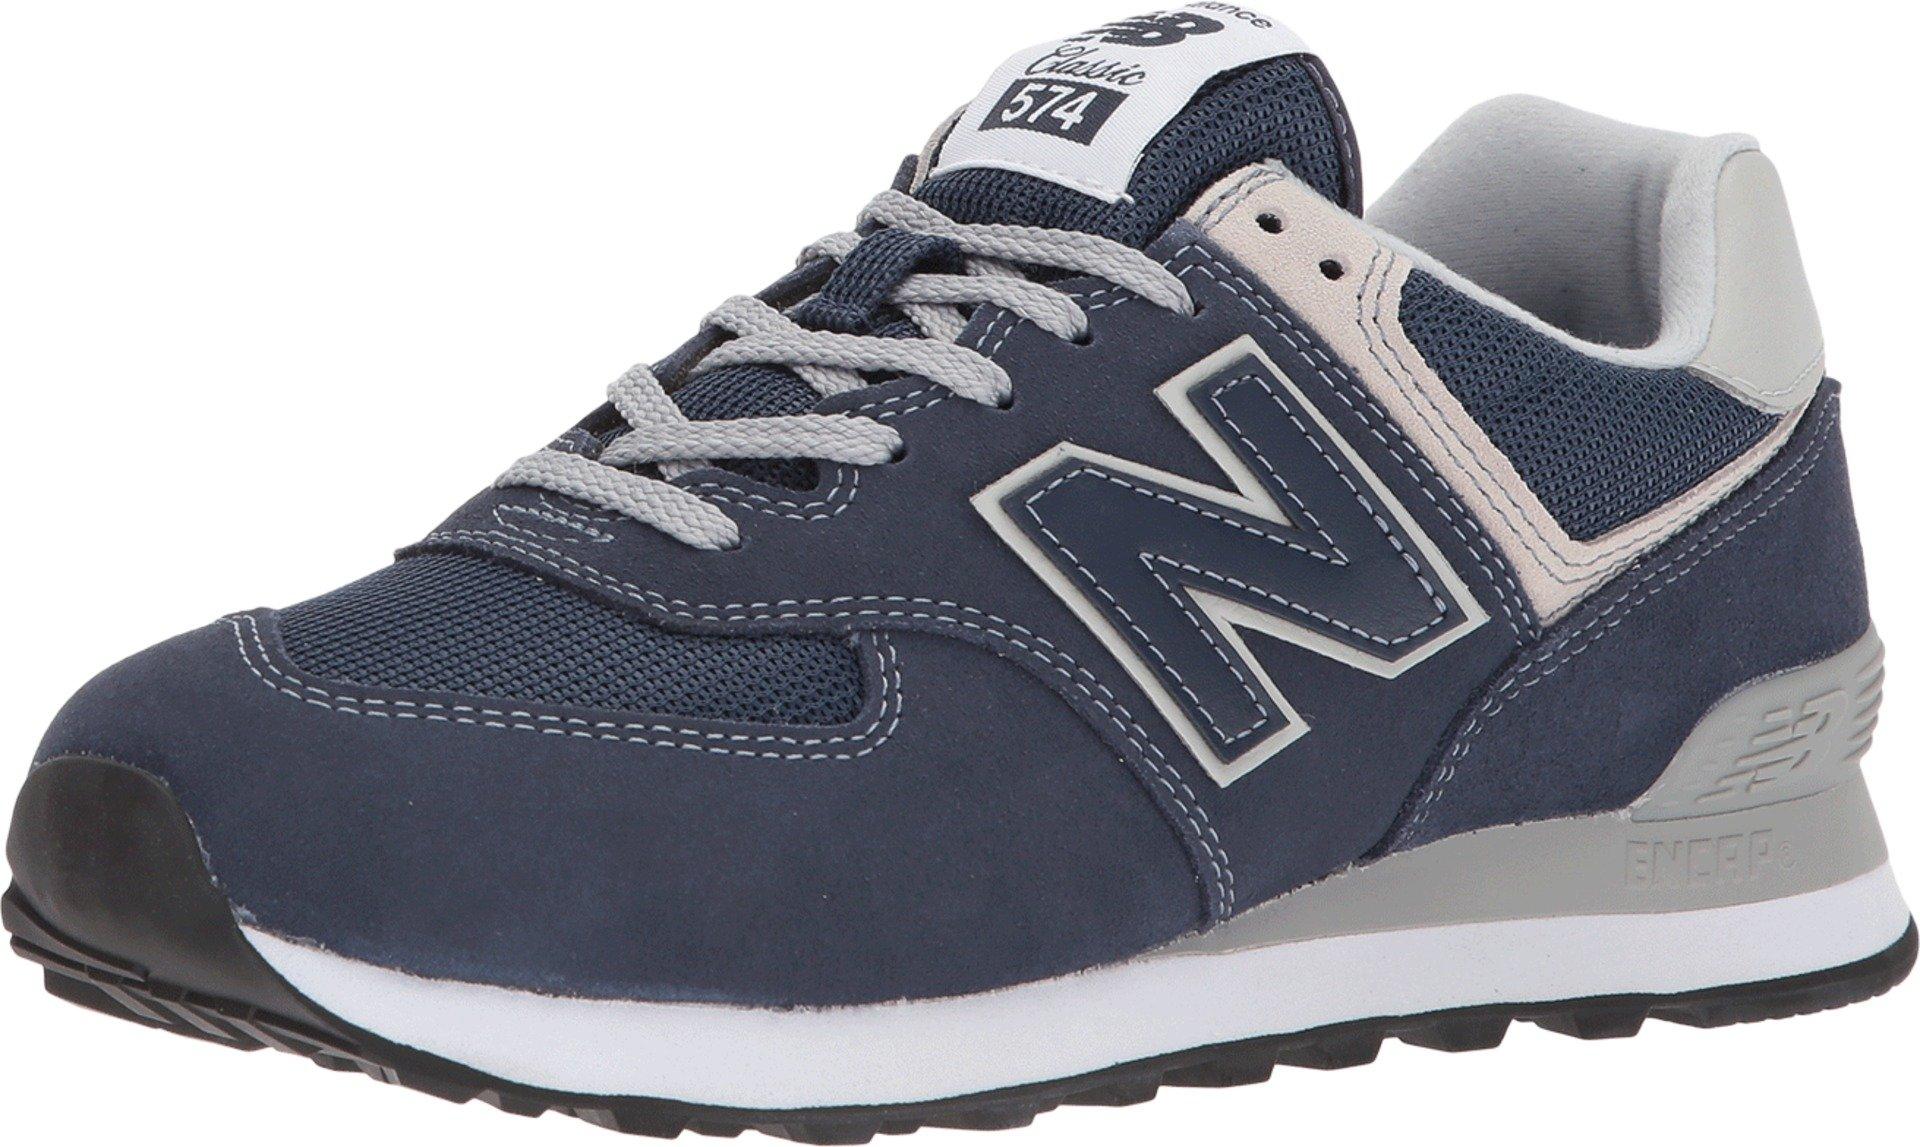 New Balance Suede Wl574v2 in Navy (Blue) - Lyst